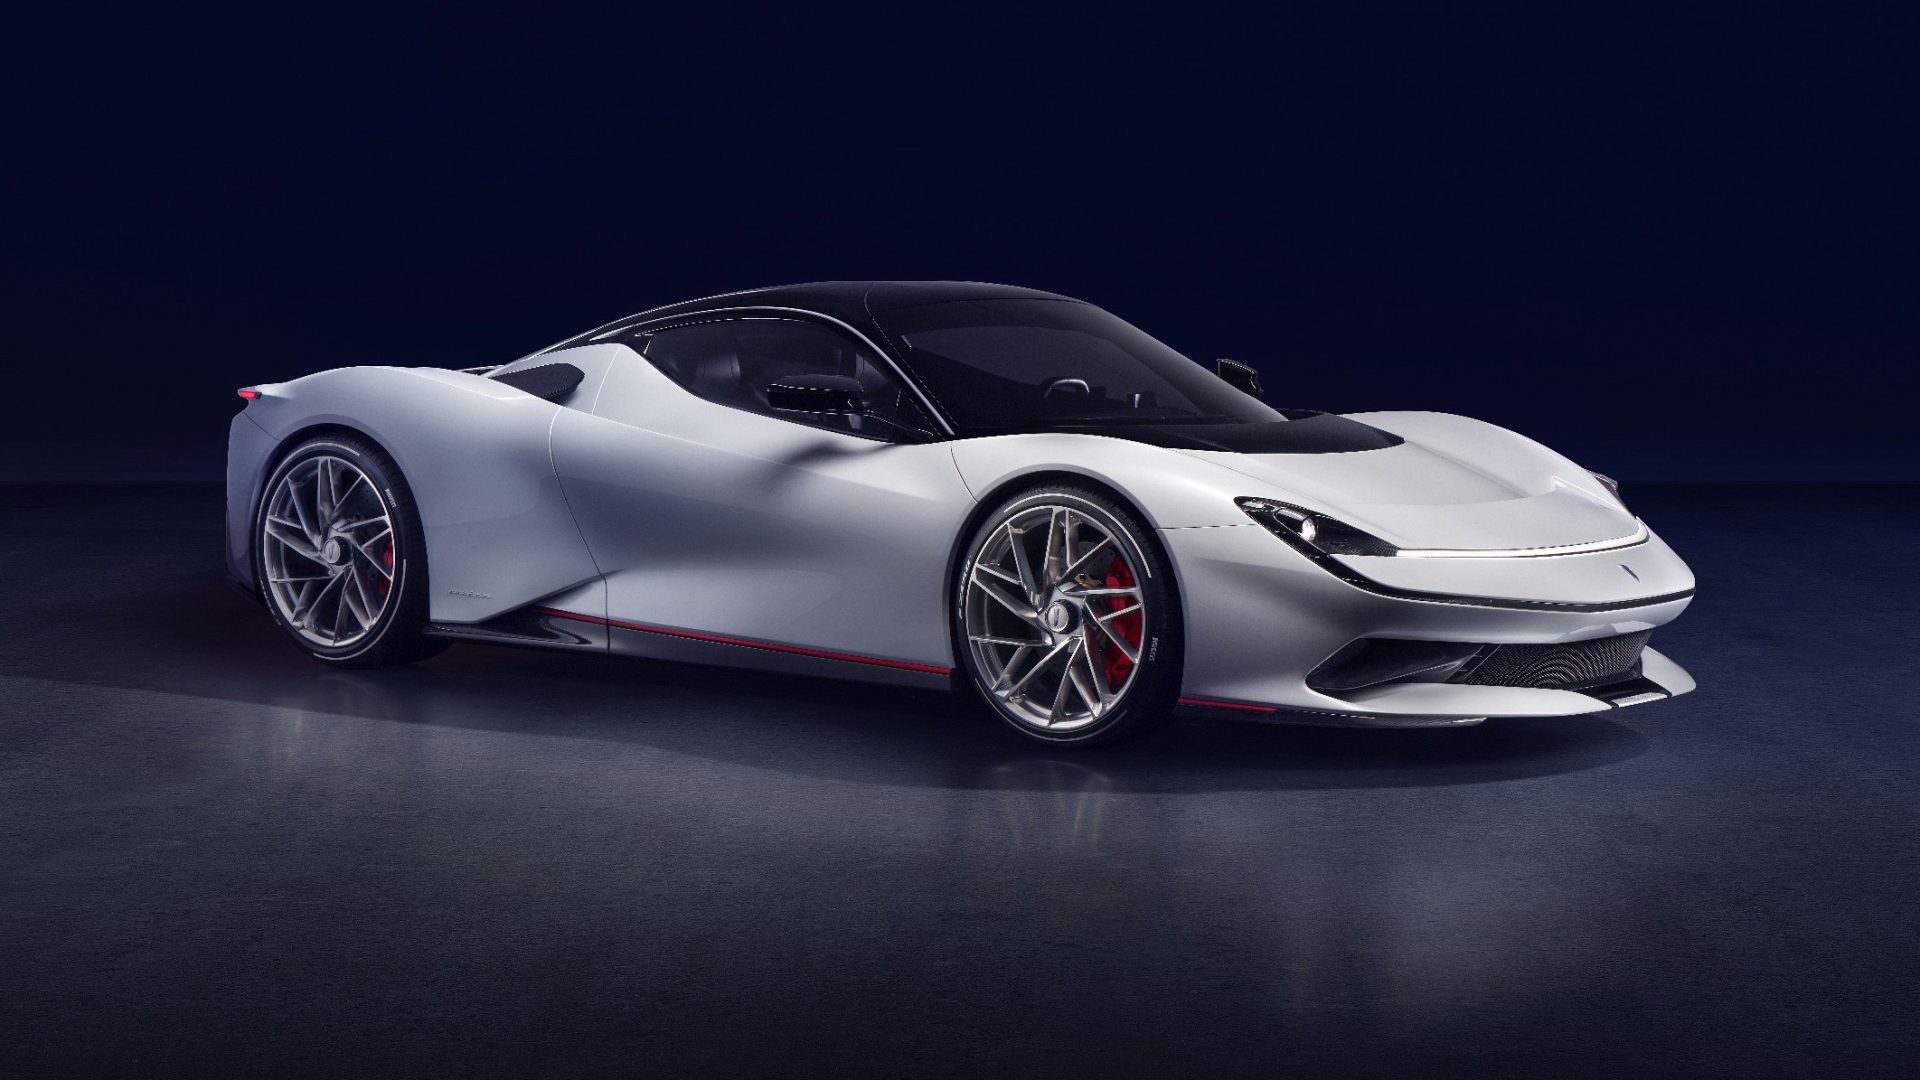 The all-electric Pininfarina Battista hypercar 'faster than a F-16 fighter jet' that can reach 217mph with zero emissions